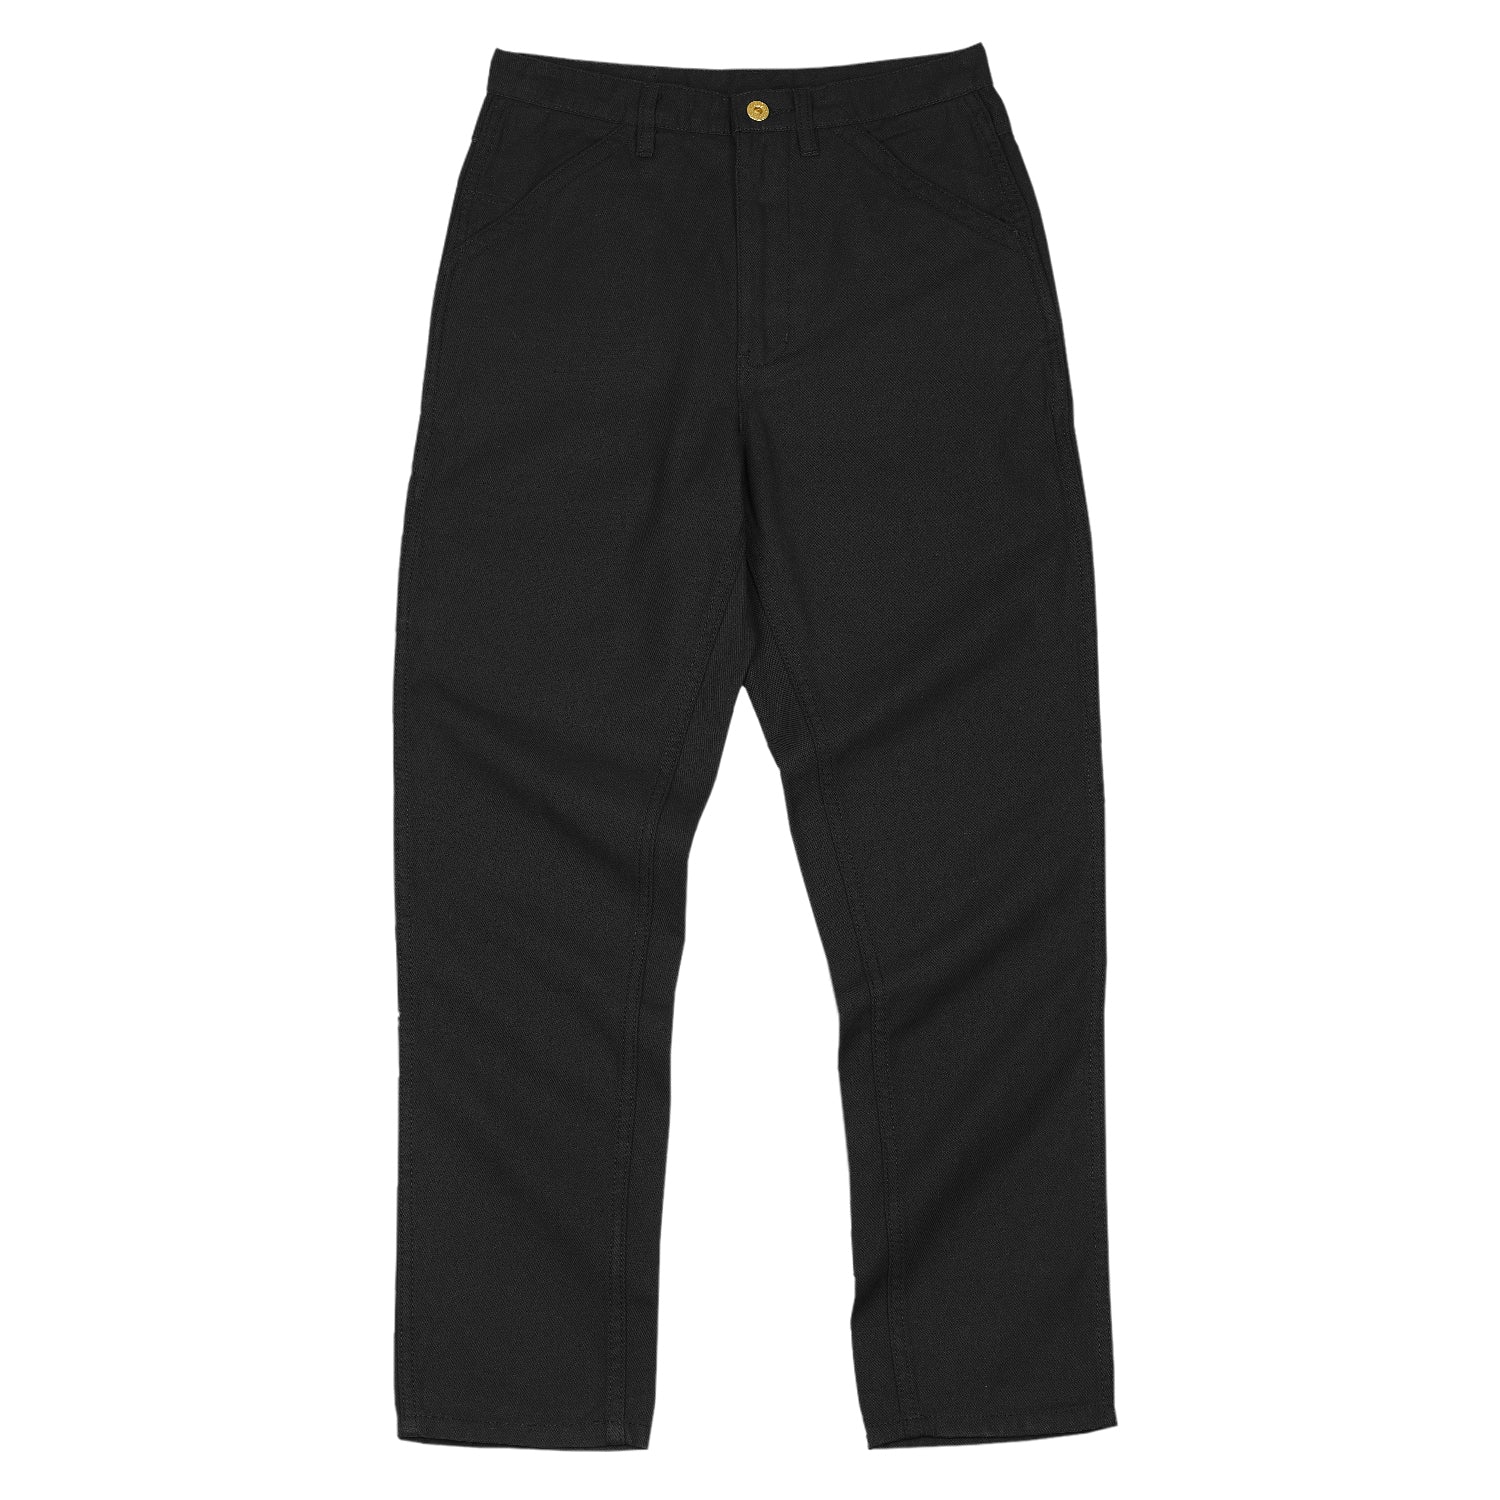 American Retro Chinos Tooling Lacquer Trousers